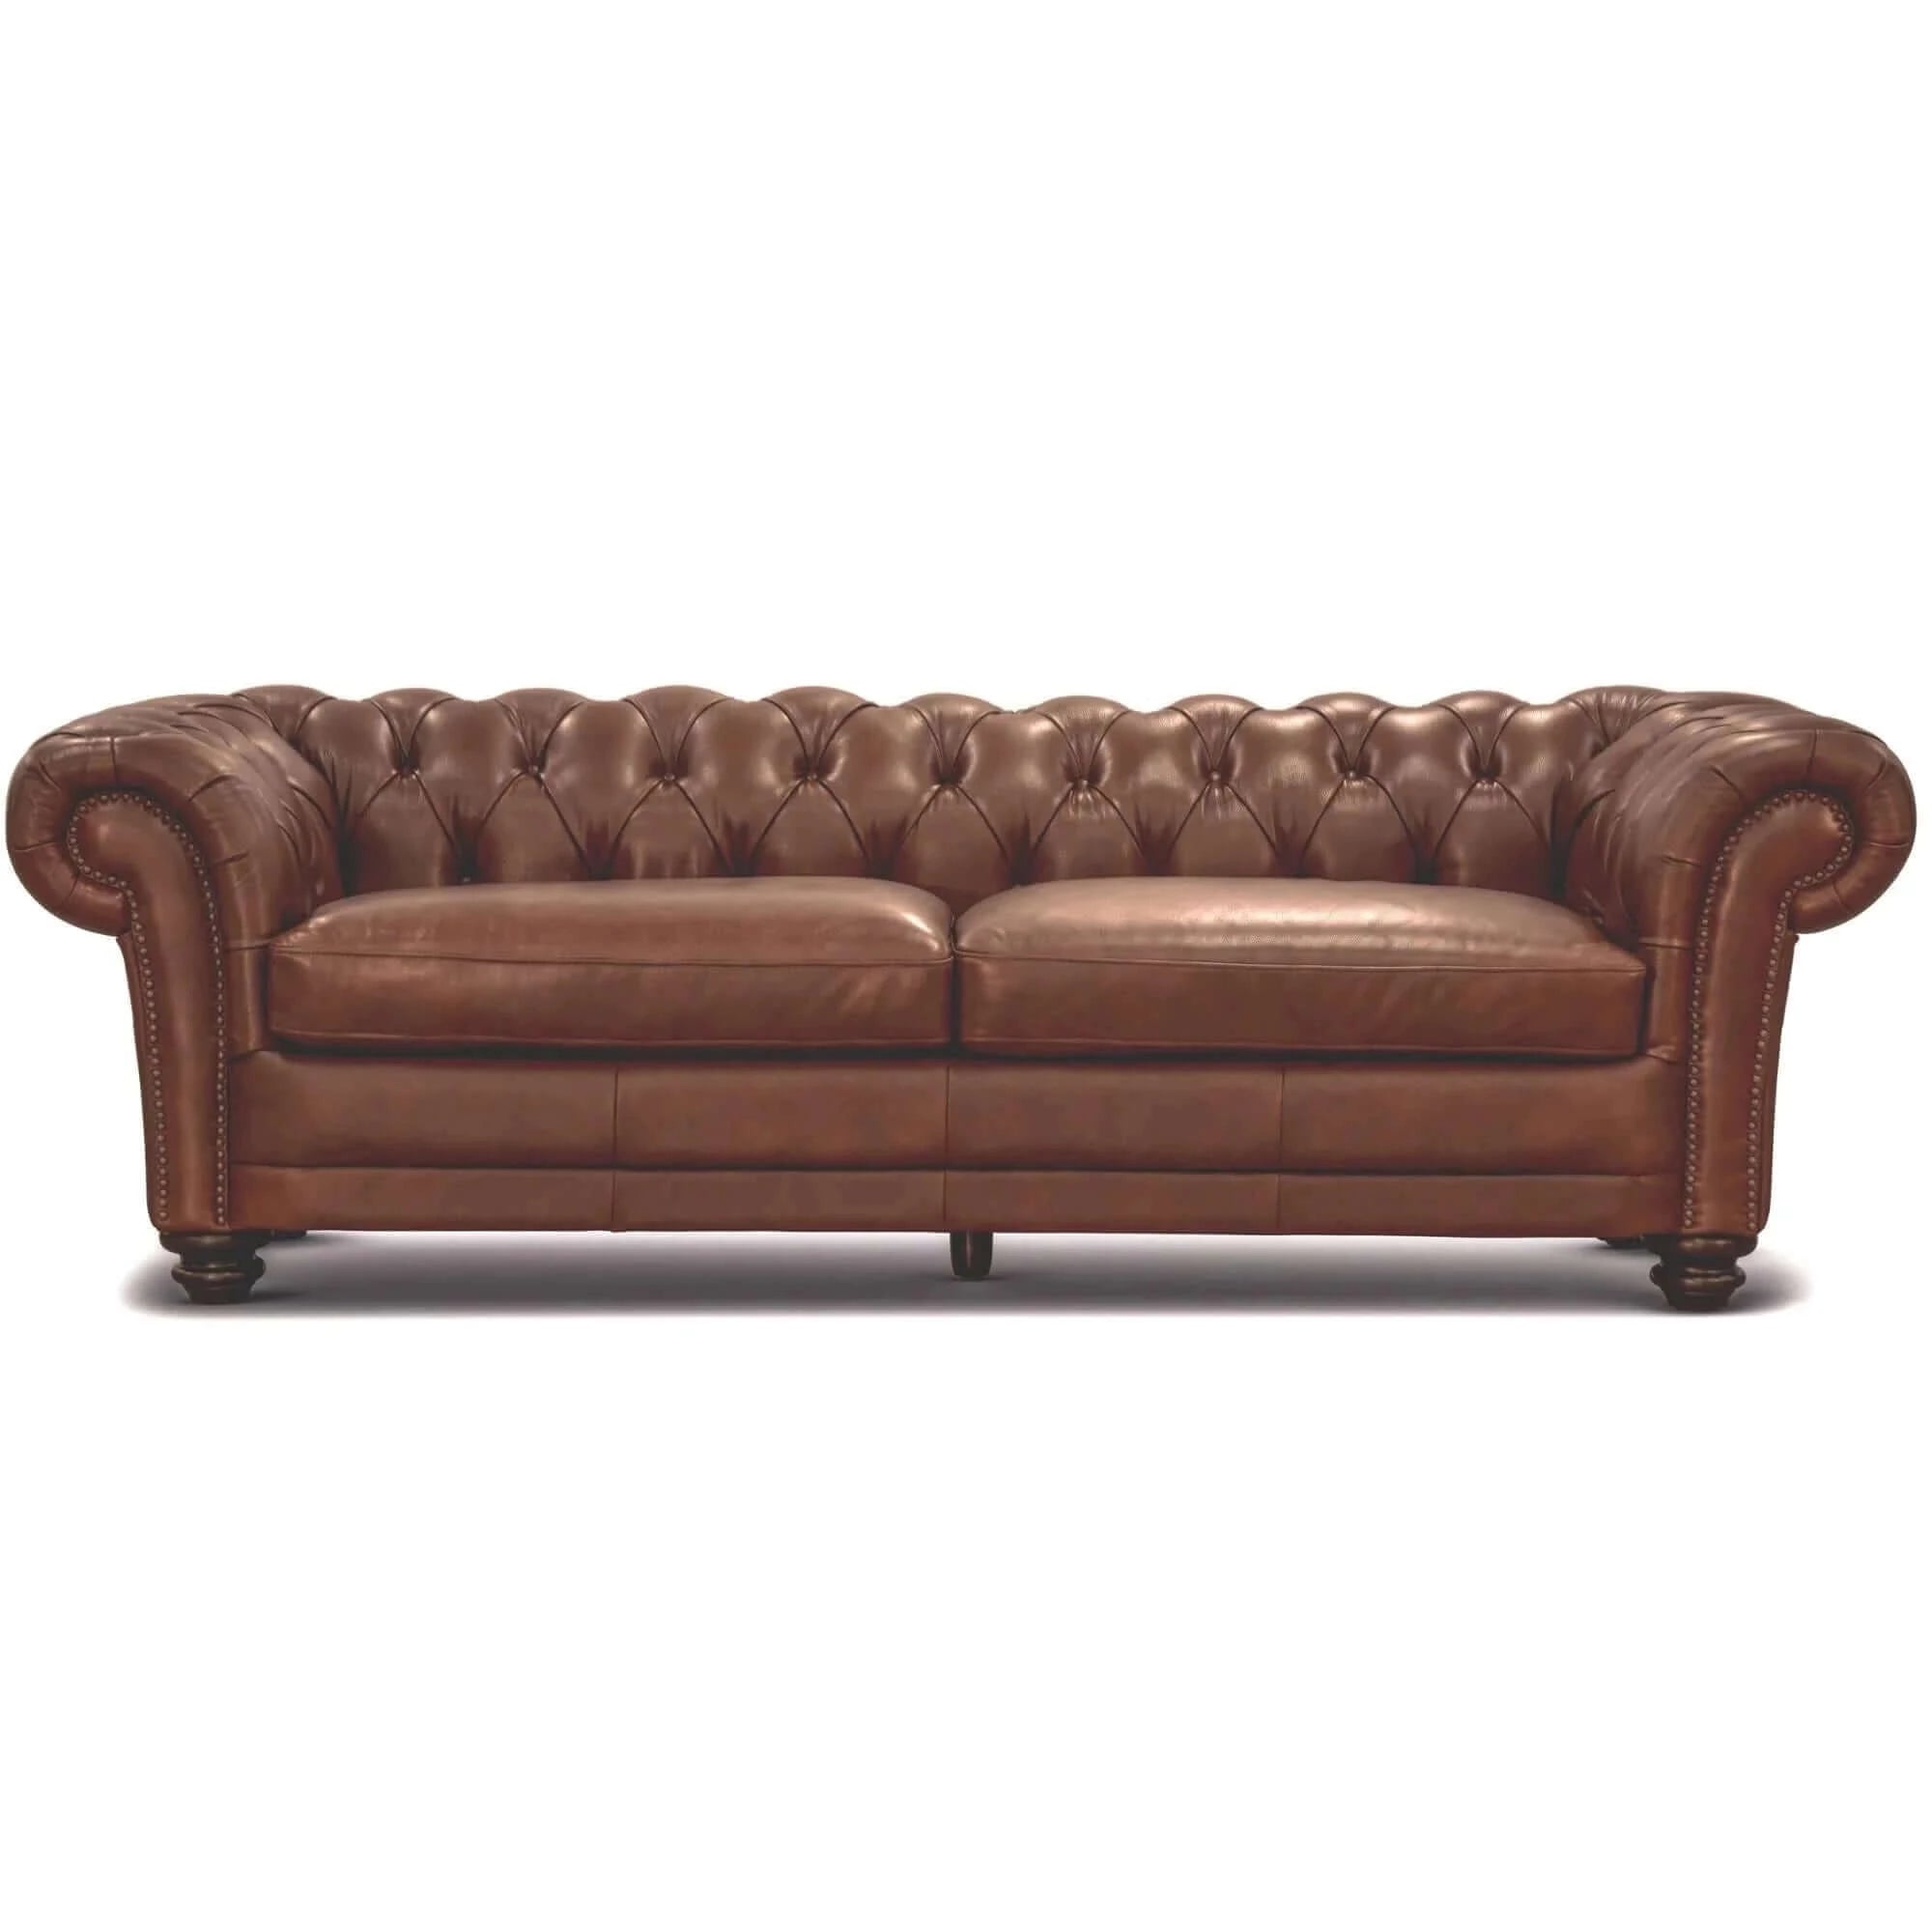 Buy sonny 3+2.5+1 seater genuine leather sofa chestfield lounge couch - butterscotch - upinteriors-Upinteriors